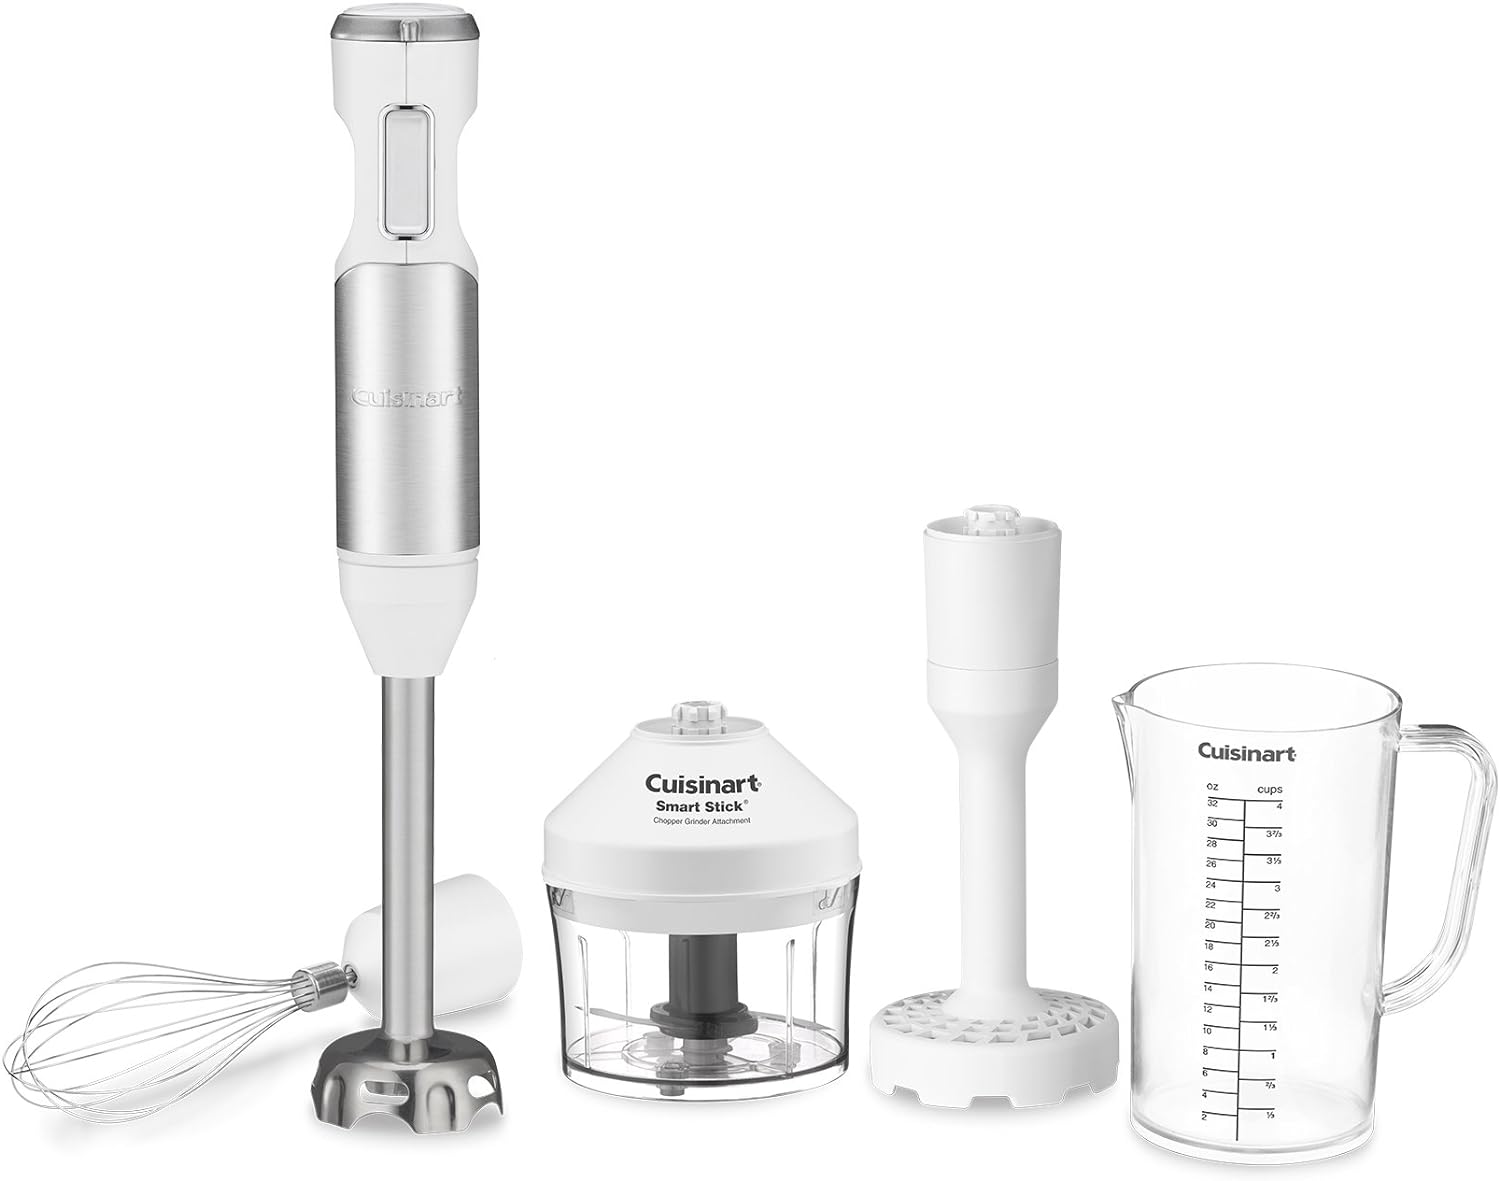 Cuisinart CSB-100WFR Smart Stick Variable Speed Hand Immersion Blender, Stainless Steel/White - Certified Refurbished